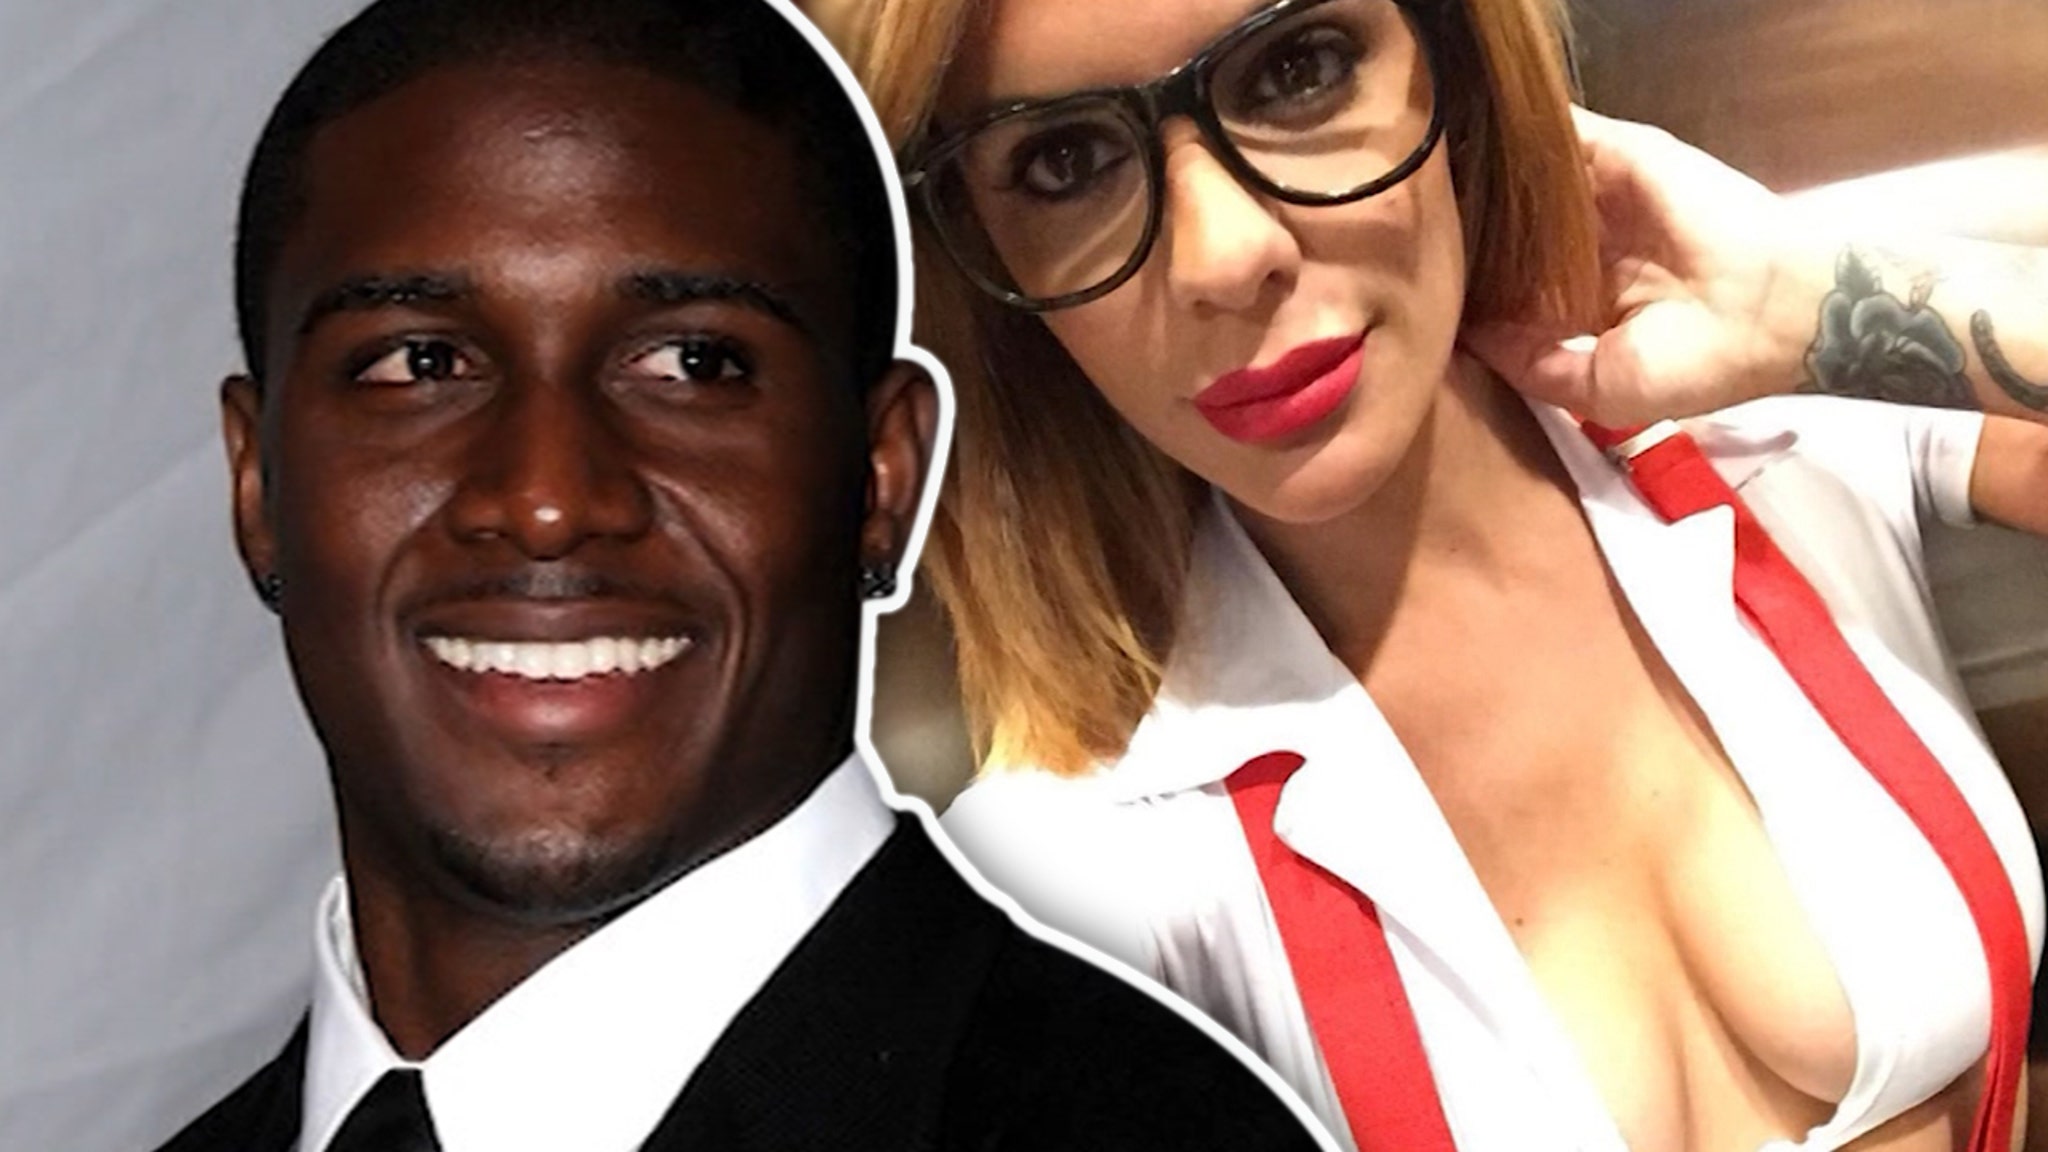 Woman Claims Reggie Bush is the Daddy.